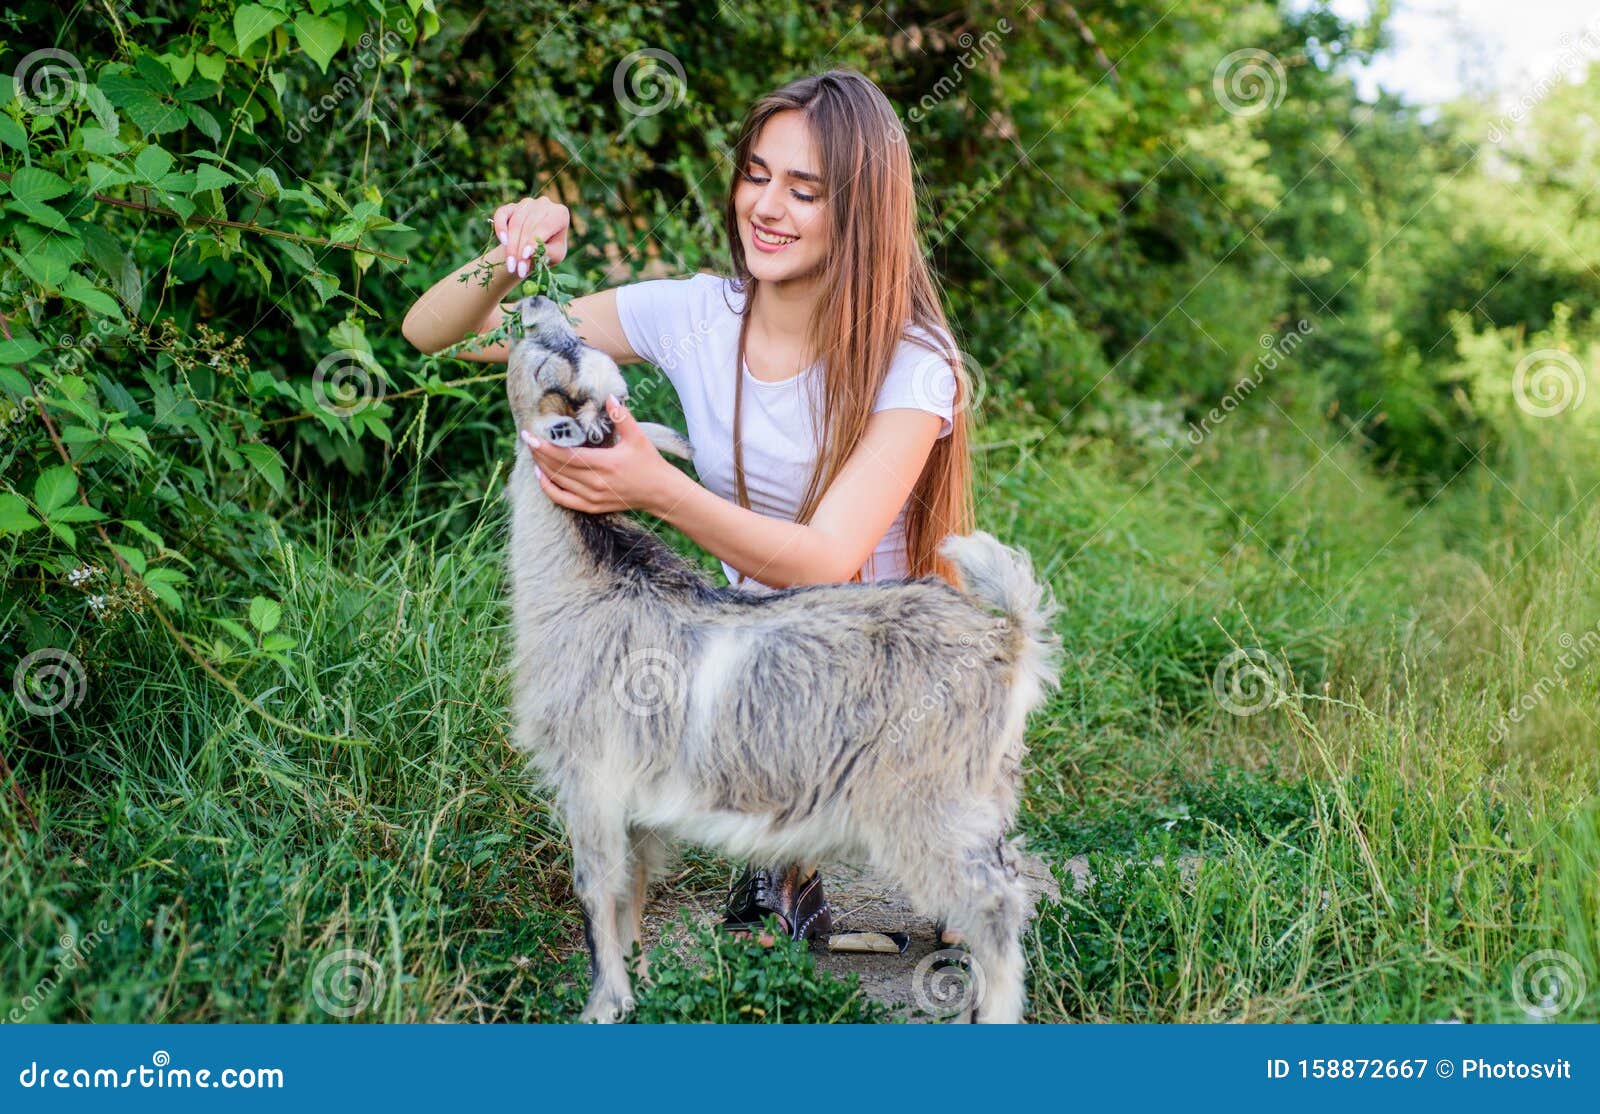 Girl Play Cute Goat. Veterinarian Occupation. Eco Farm. Love and Care. Feeding  Animal. Animals Law Stock Image - Image of protecting, play: 158872667